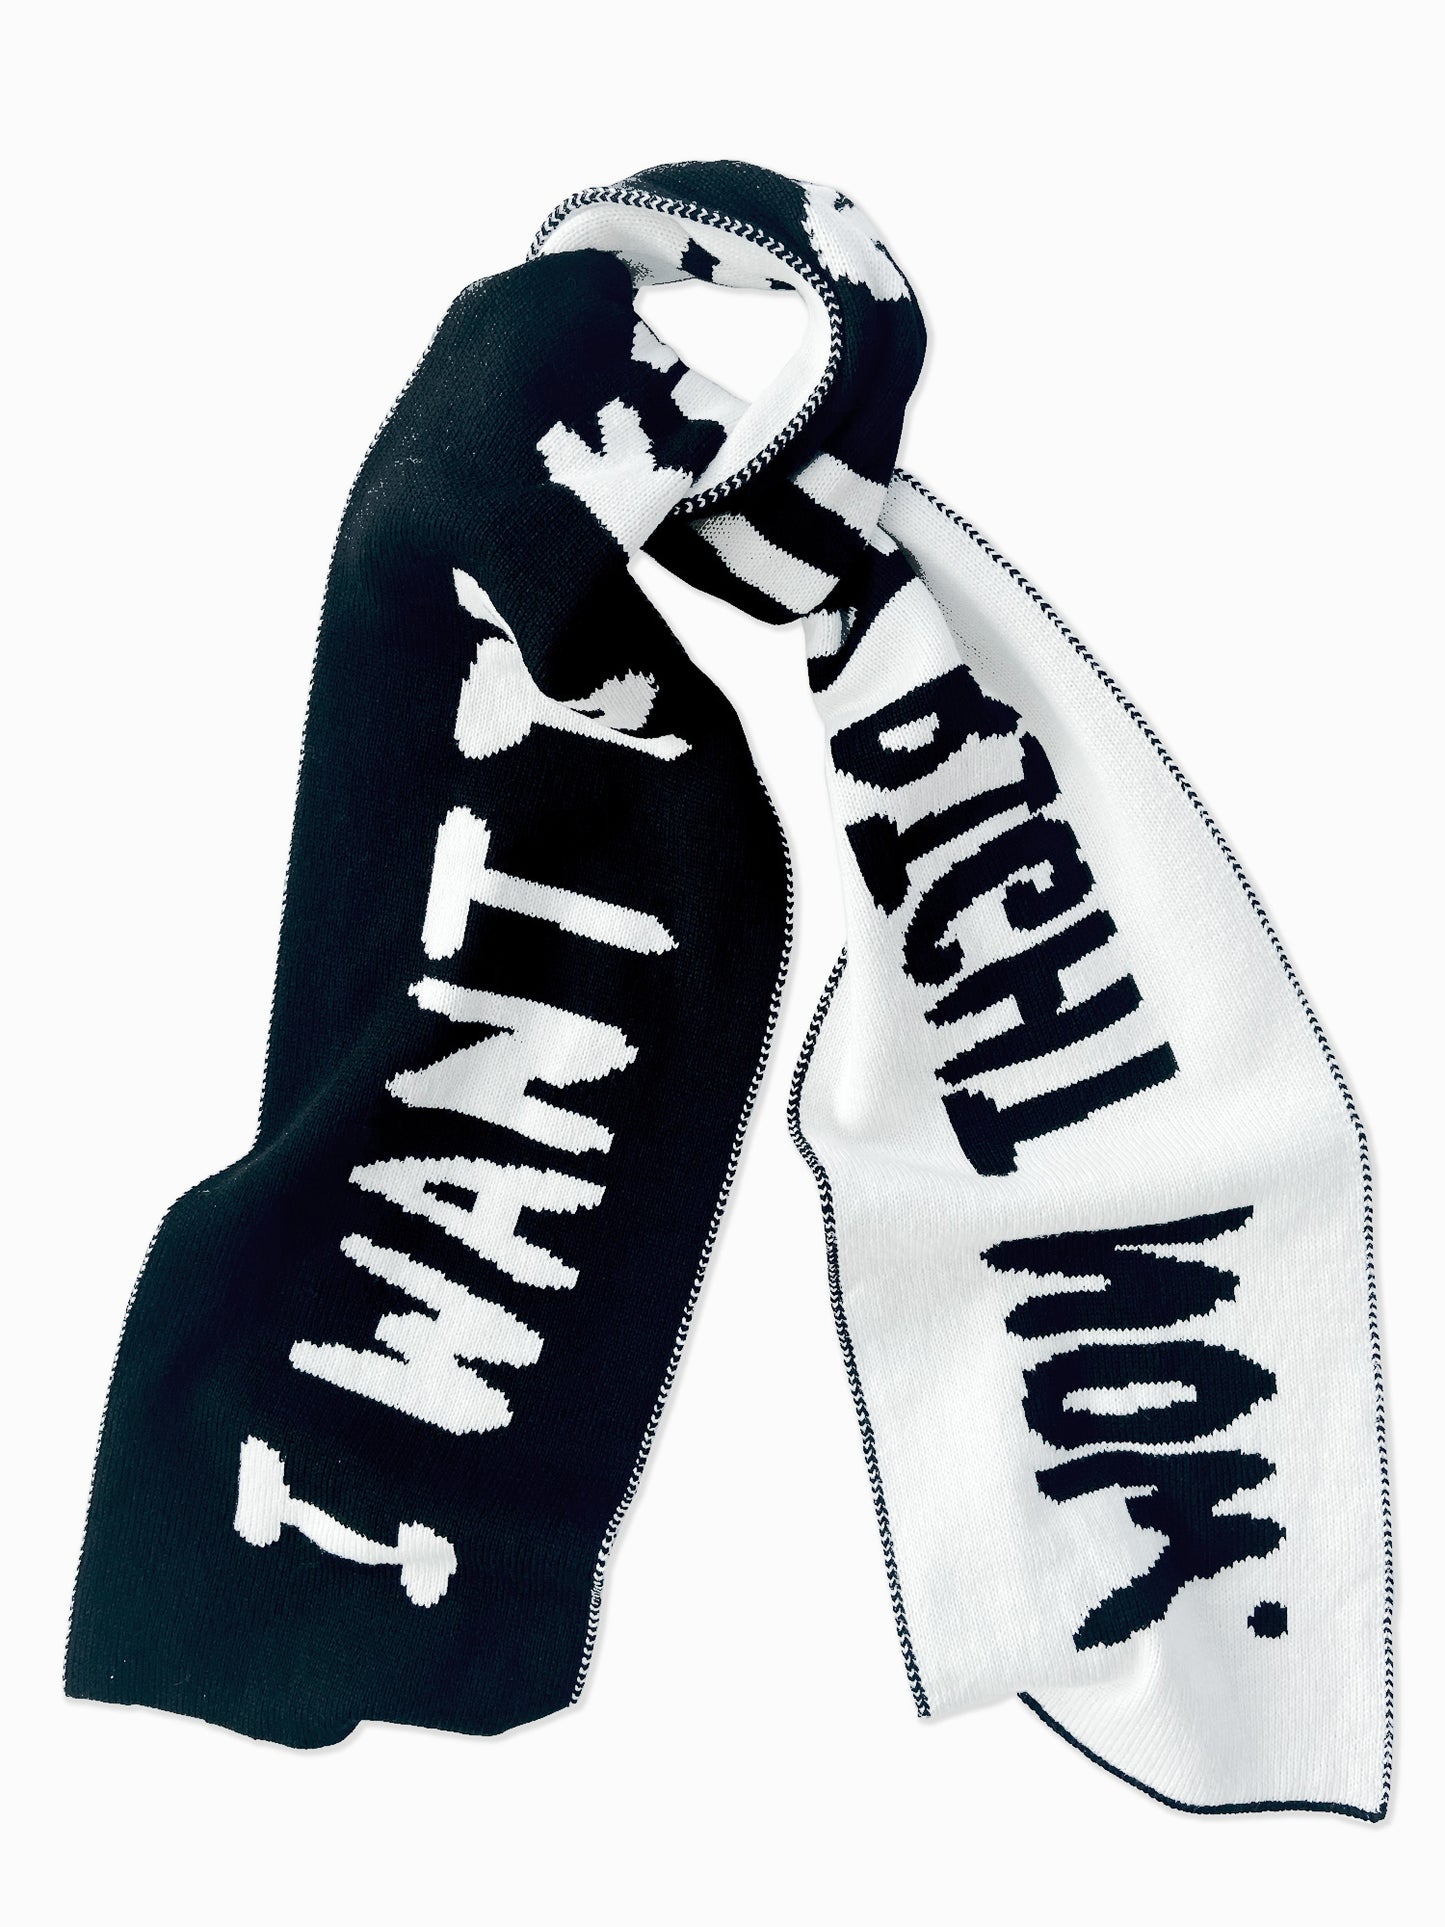 Kiss Slogan Monochrome Wool and Cashmere Scarf